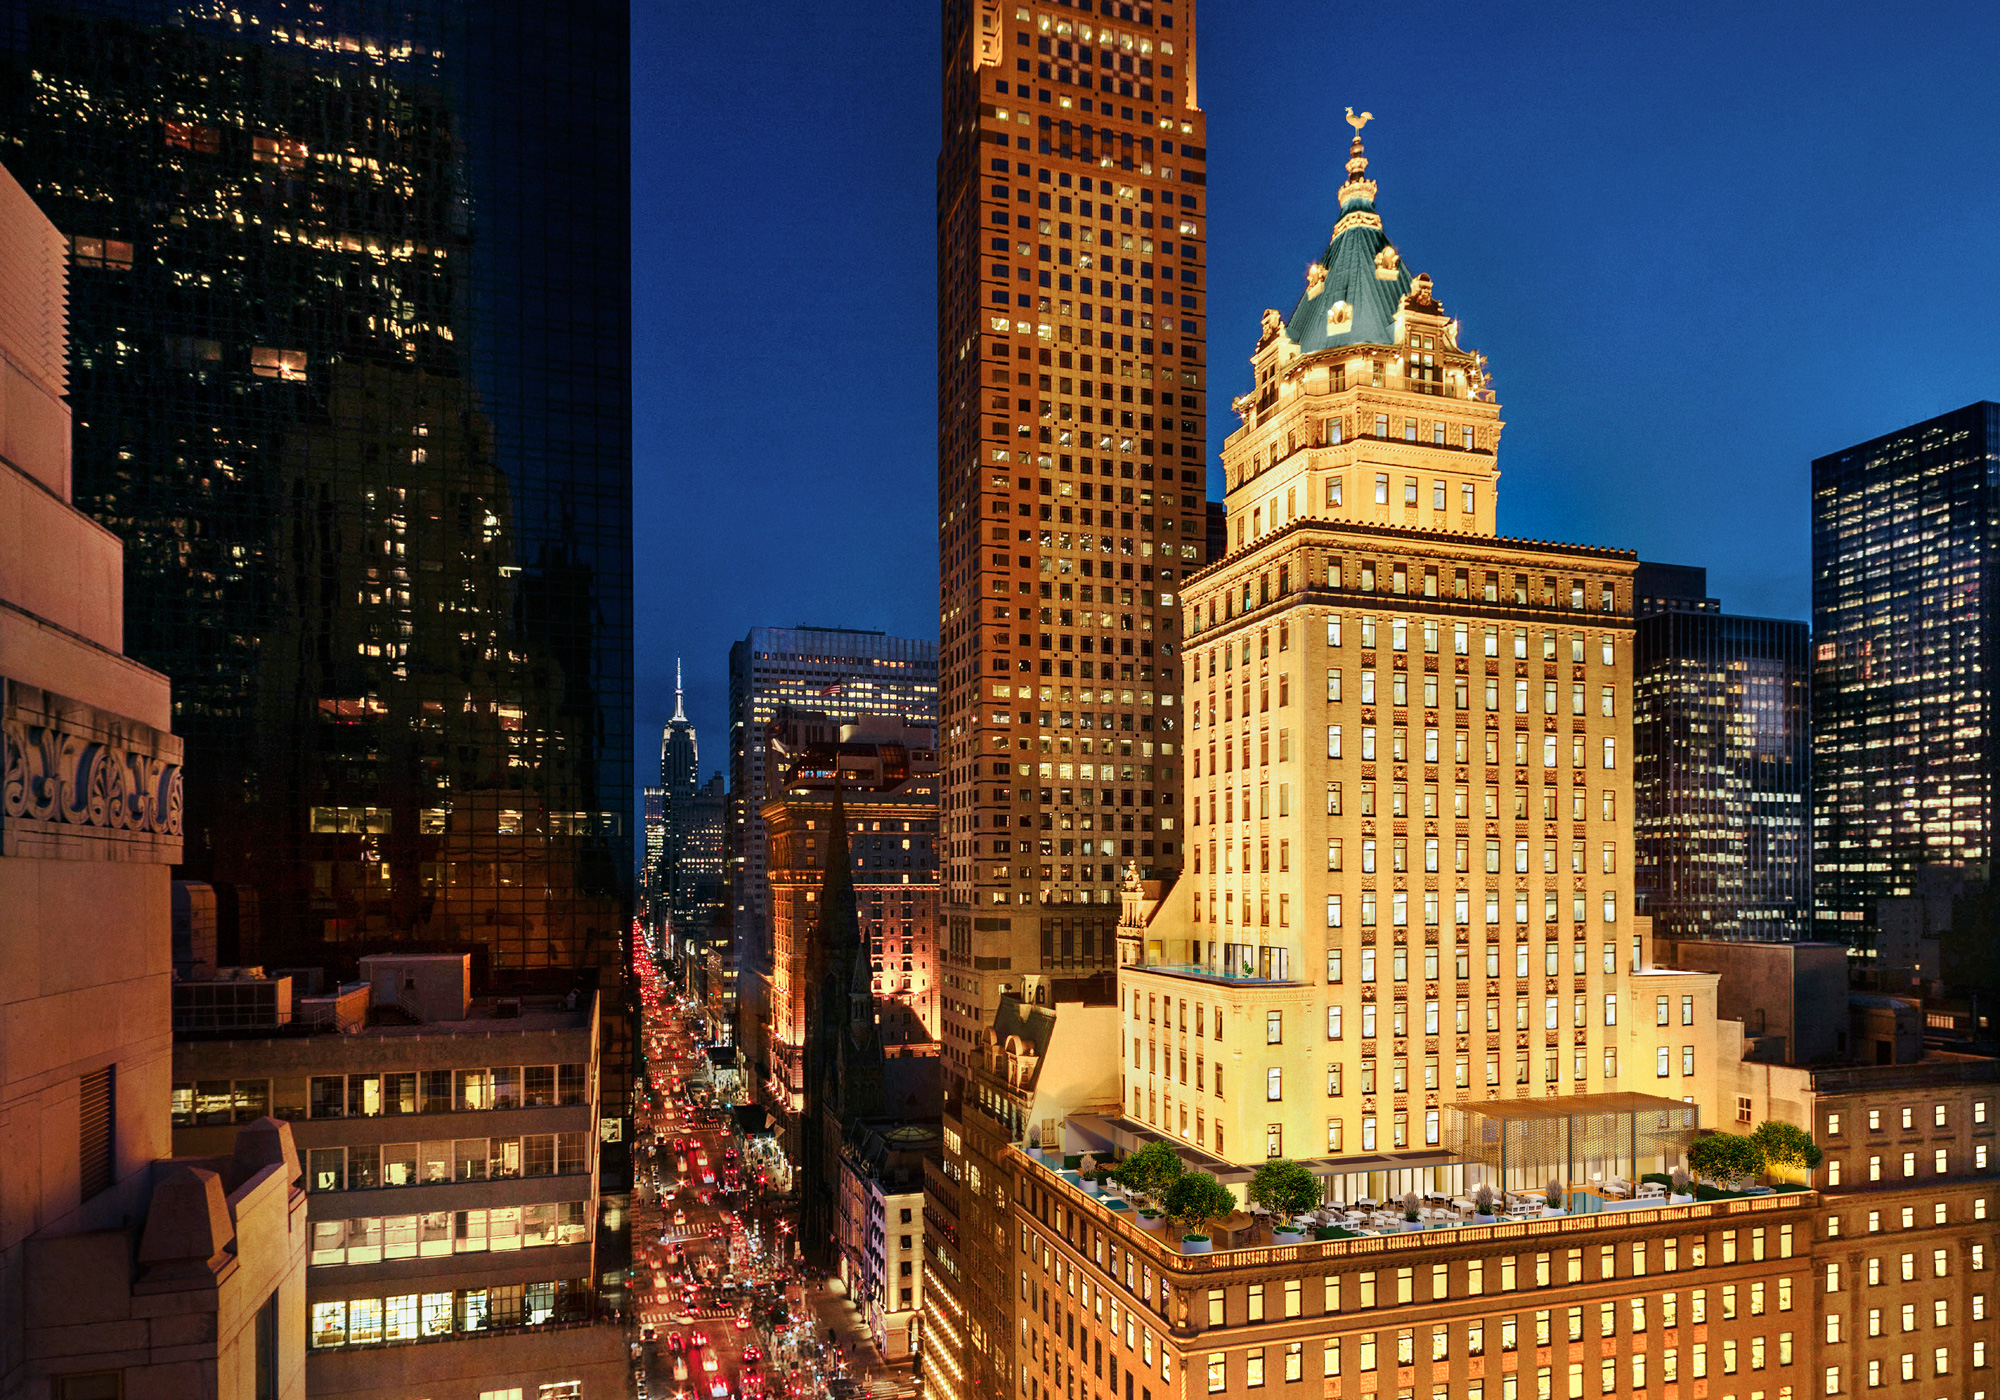 A sky view of the Aman hotel building in New York